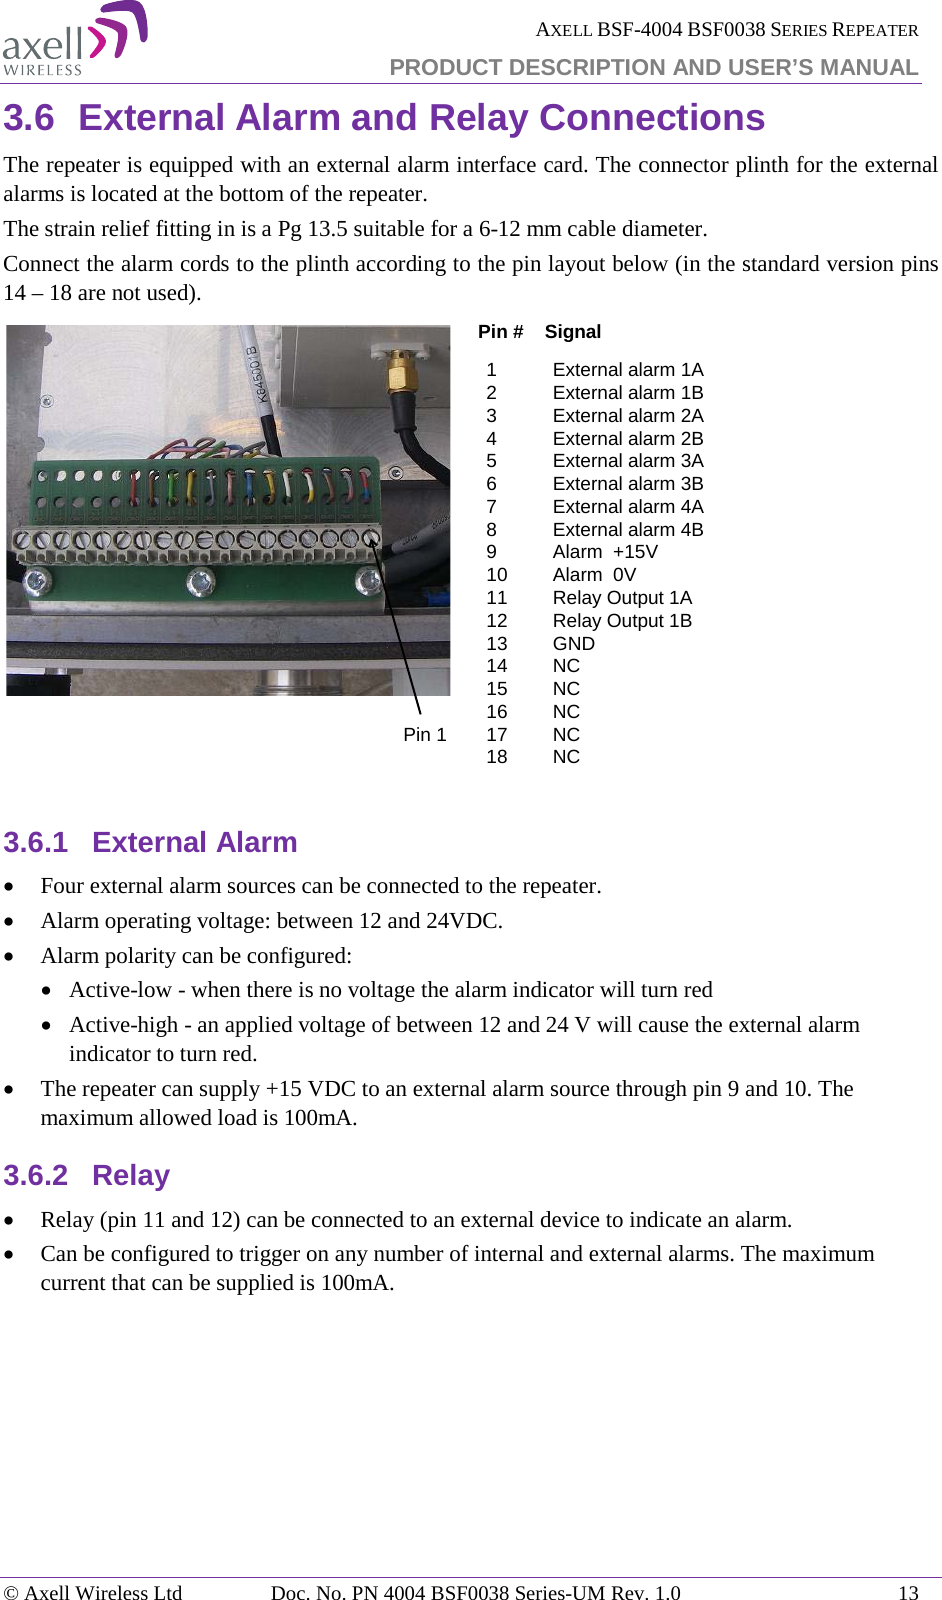  AXELL BSF-4004 BSF0038 SERIES REPEATER PRODUCT DESCRIPTION AND USER’S MANUAL  3.6 External Alarm and Relay Connections The repeater is equipped with an external alarm interface card. The connector plinth for the external alarms is located at the bottom of the repeater.  The strain relief fitting in is a Pg 13.5 suitable for a 6-12 mm cable diameter. Connect the alarm cords to the plinth according to the pin layout below (in the standard version pins 14 – 18 are not used).  3.6.1 External Alarm  • Four external alarm sources can be connected to the repeater. • Alarm operating voltage: between 12 and 24VDC.  • Alarm polarity can be configured:  • Active-low - when there is no voltage the alarm indicator will turn red • Active-high - an applied voltage of between 12 and 24 V will cause the external alarm indicator to turn red. • The repeater can supply +15 VDC to an external alarm source through pin 9 and 10. The maximum allowed load is 100mA. 3.6.2 Relay • Relay (pin 11 and 12) can be connected to an external device to indicate an alarm. • Can be configured to trigger on any number of internal and external alarms. The maximum current that can be supplied is 100mA.    1External alarm 1A 2External alarm 1B3External alarm 2A 4External alarm 2B 5External alarm 3A 6External alarm 3B 7External alarm 4A 8External alarm 4B 9Alarm  +15V 10 Alarm  0V 11 Relay Output 1A  12 Relay Output 1B13 GND14 NC15 NC16 NC17 NC18 NCPin #    SignalPin 1© Axell Wireless Ltd Doc. No. PN 4004 BSF0038 Series-UM Rev. 1.0 13 